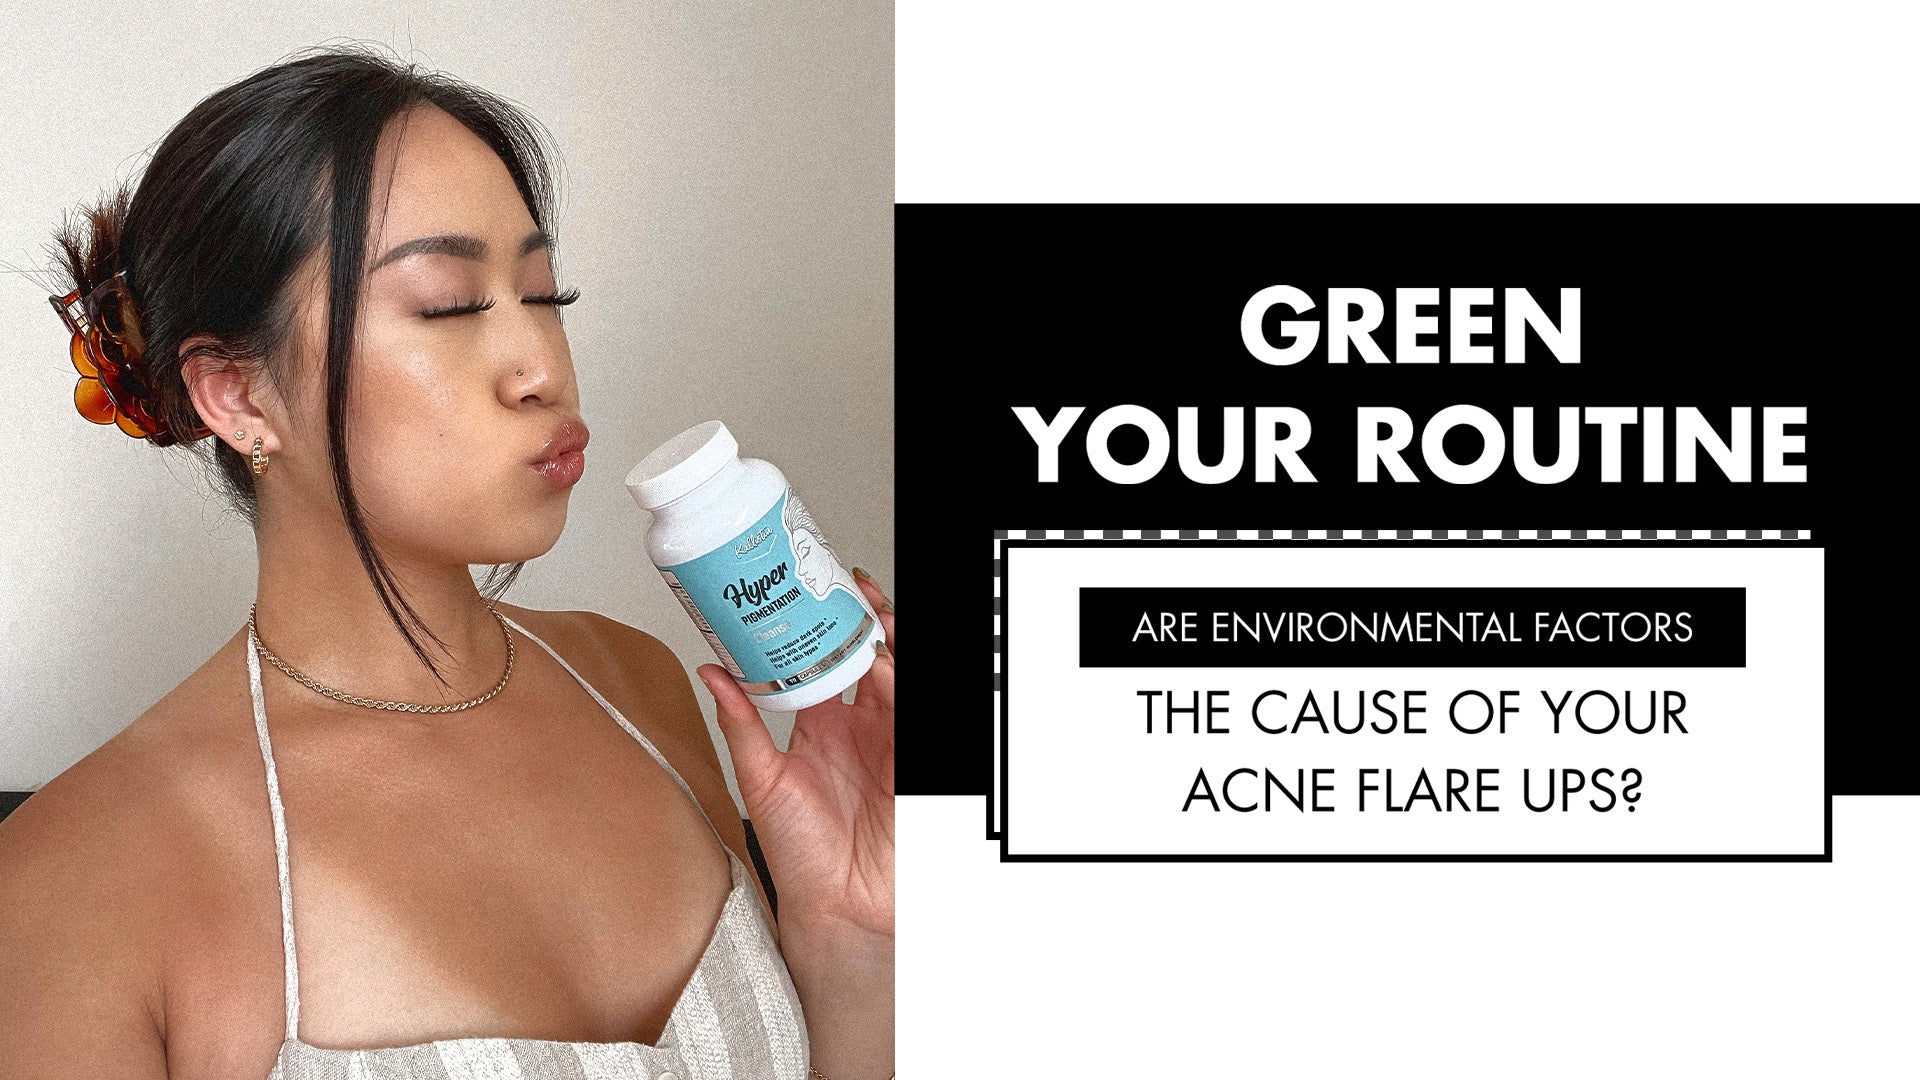 Are environmental factors the cause of your acne flare ups?